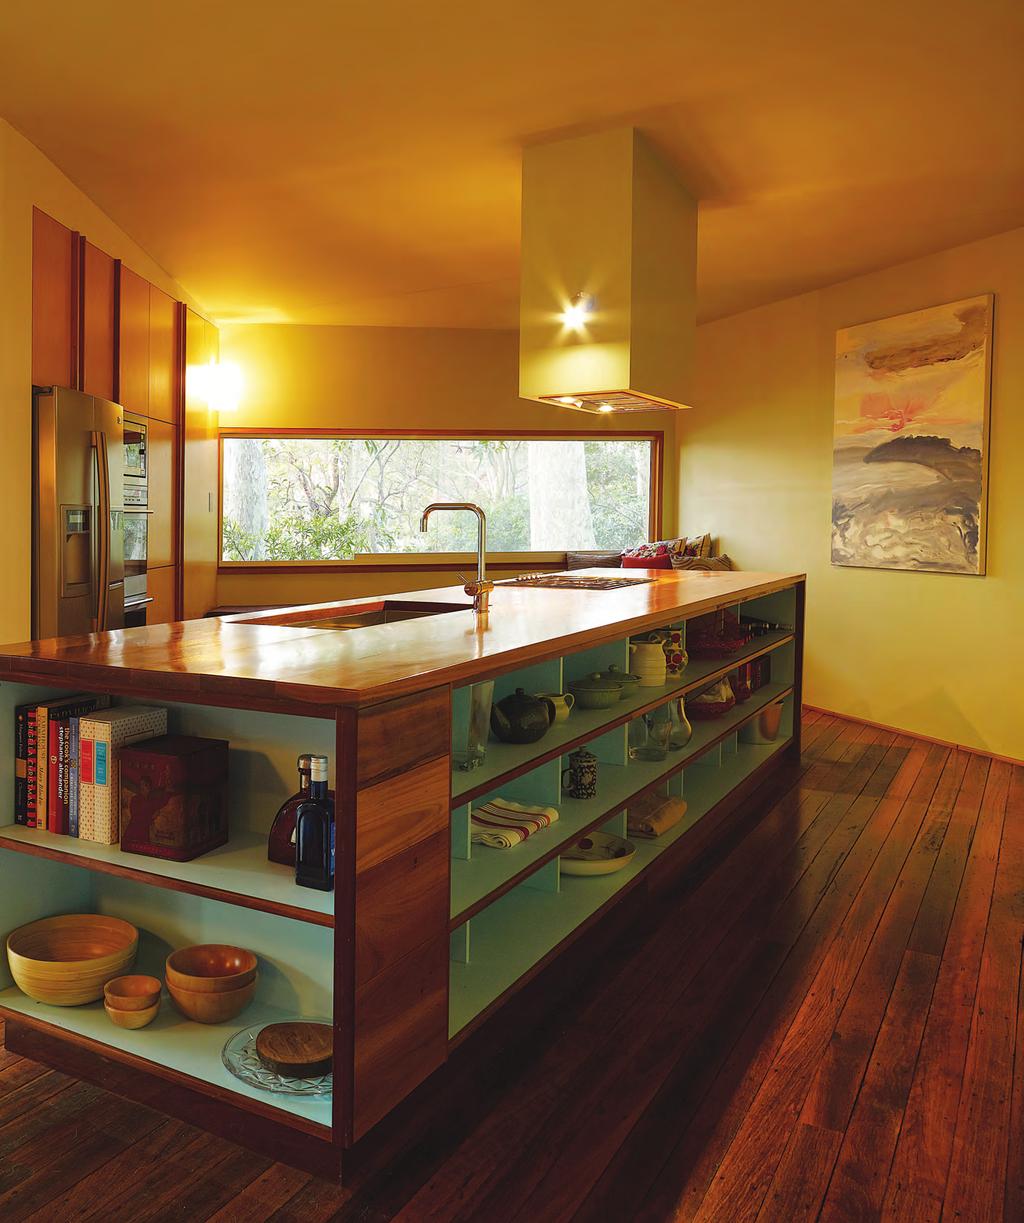 01 01 The island unit features built-in shelving, while also